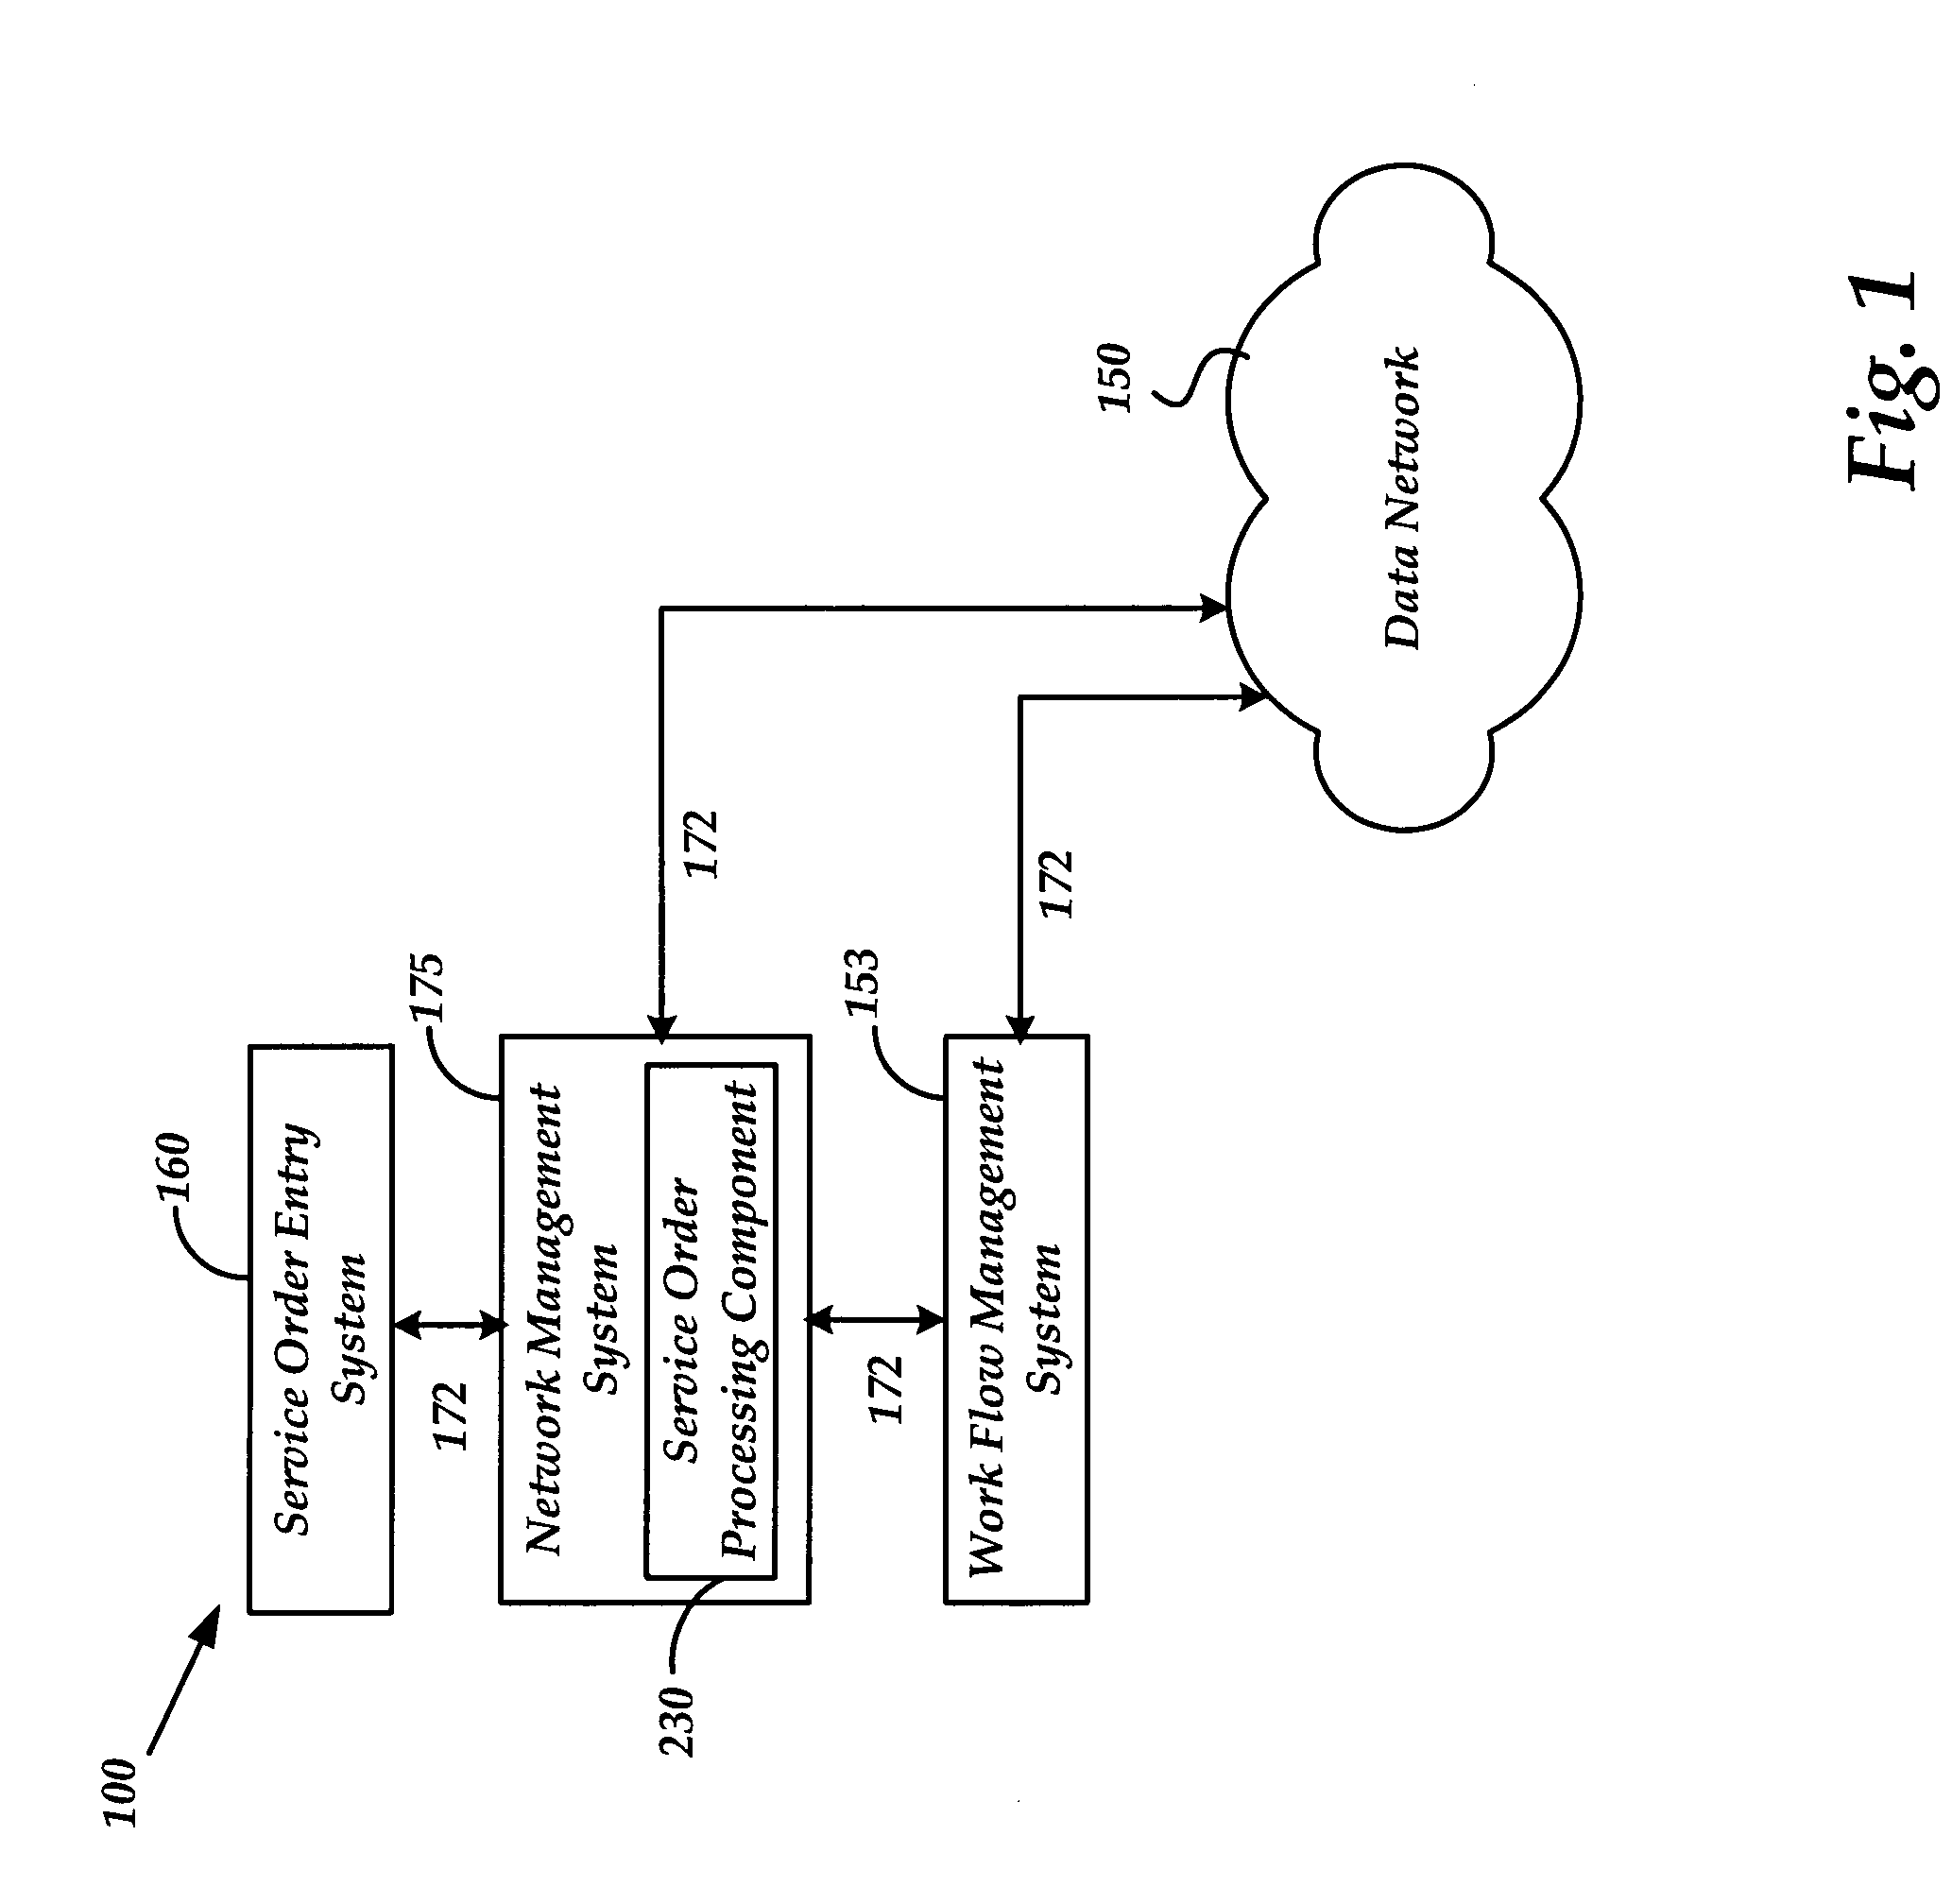 Methods, systems and computer-readable media for dynamically recognizing and processing service order types in a network management system